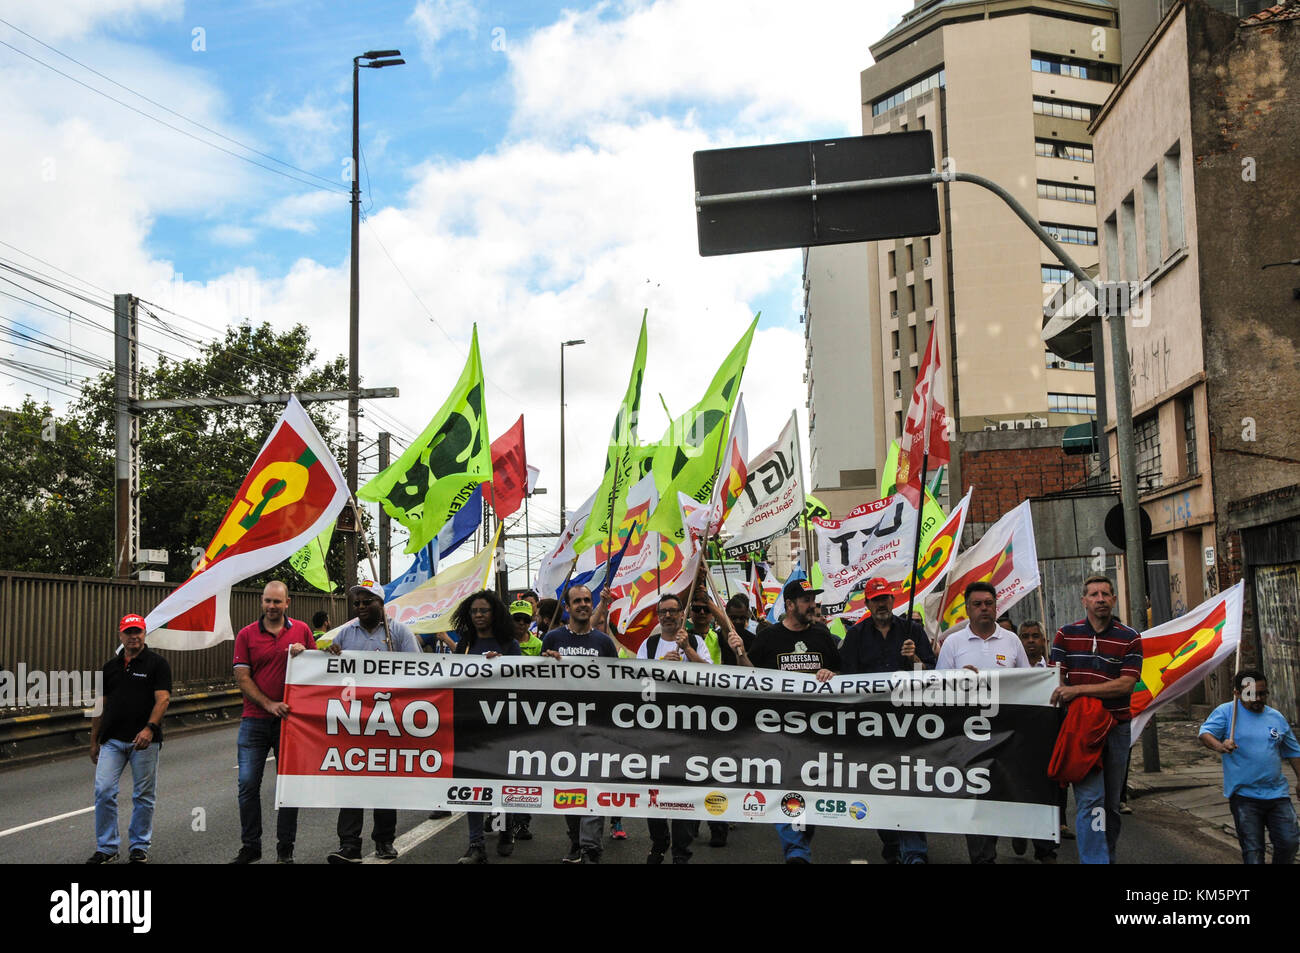 Porto Alegre, Brazil. 5th Dec, 2017. Central unions protest today, 05, at the airport Salgado Filho, in the city of Porto Alegre. The protest was the first of a series of acts organized for today in Rio Grande do Sul. This morning, at 8am, the demonstration began at the bus station in the capital of the state of Rio Grande do Sul. Around 5 o&#39;k, therehere were also acts at the Salgado Filho Airport. At this moment, trade unionists are now marching to the INSS headquarters. Demonstrators promise to mobilize all day in the city. (Photo: Omar de Oliveira/Fot Stock Photo